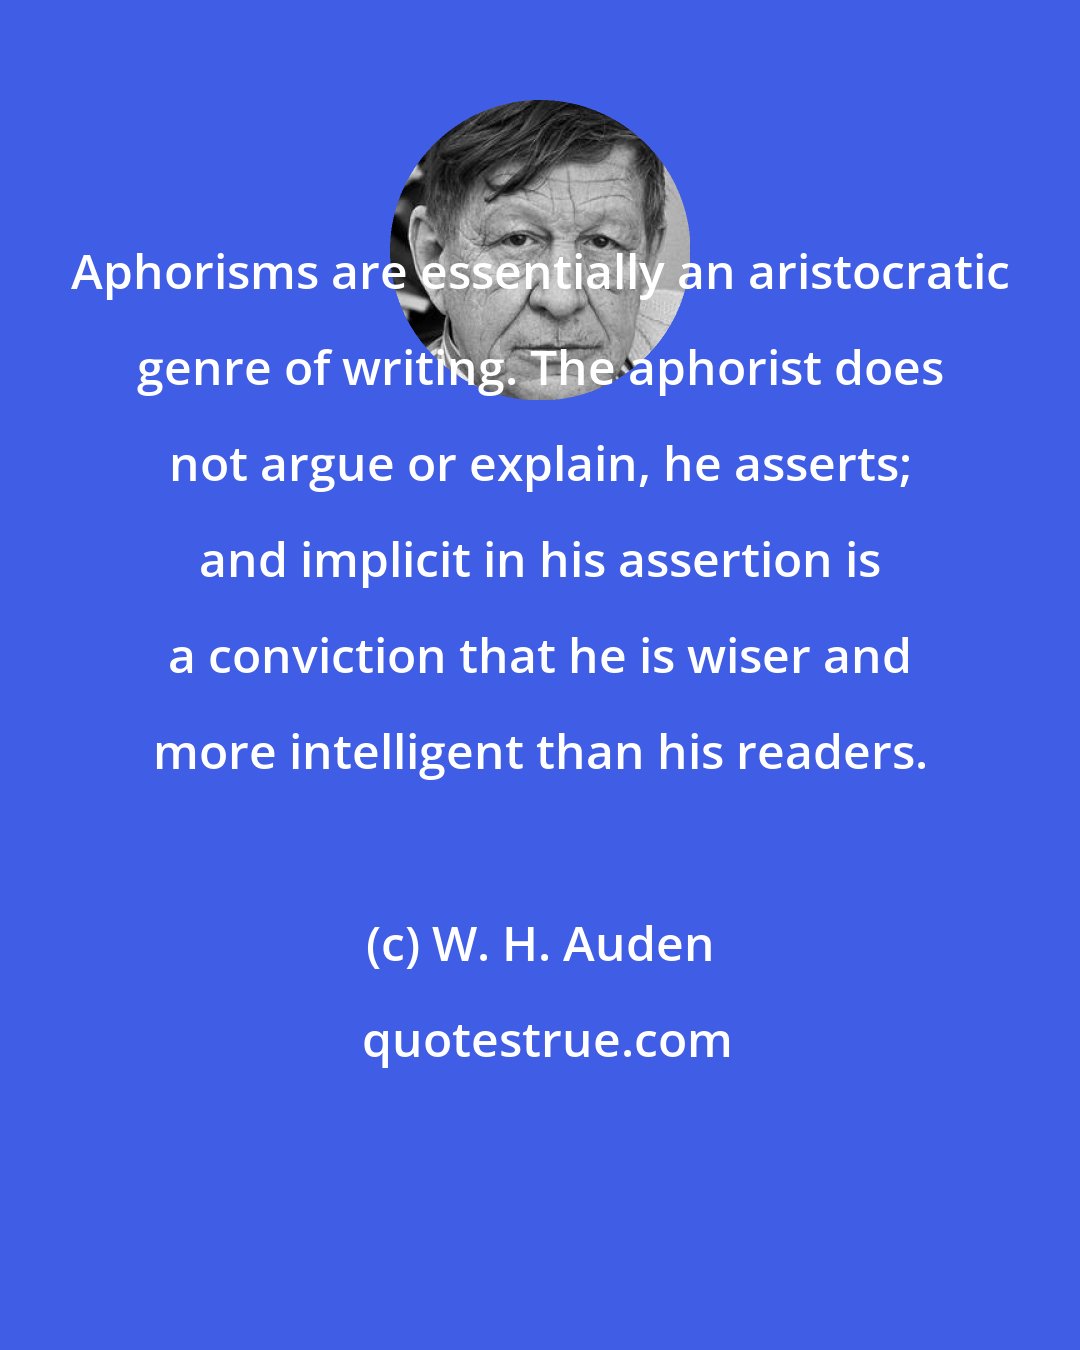 W. H. Auden: Aphorisms are essentially an aristocratic genre of writing. The aphorist does not argue or explain, he asserts; and implicit in his assertion is a conviction that he is wiser and more intelligent than his readers.